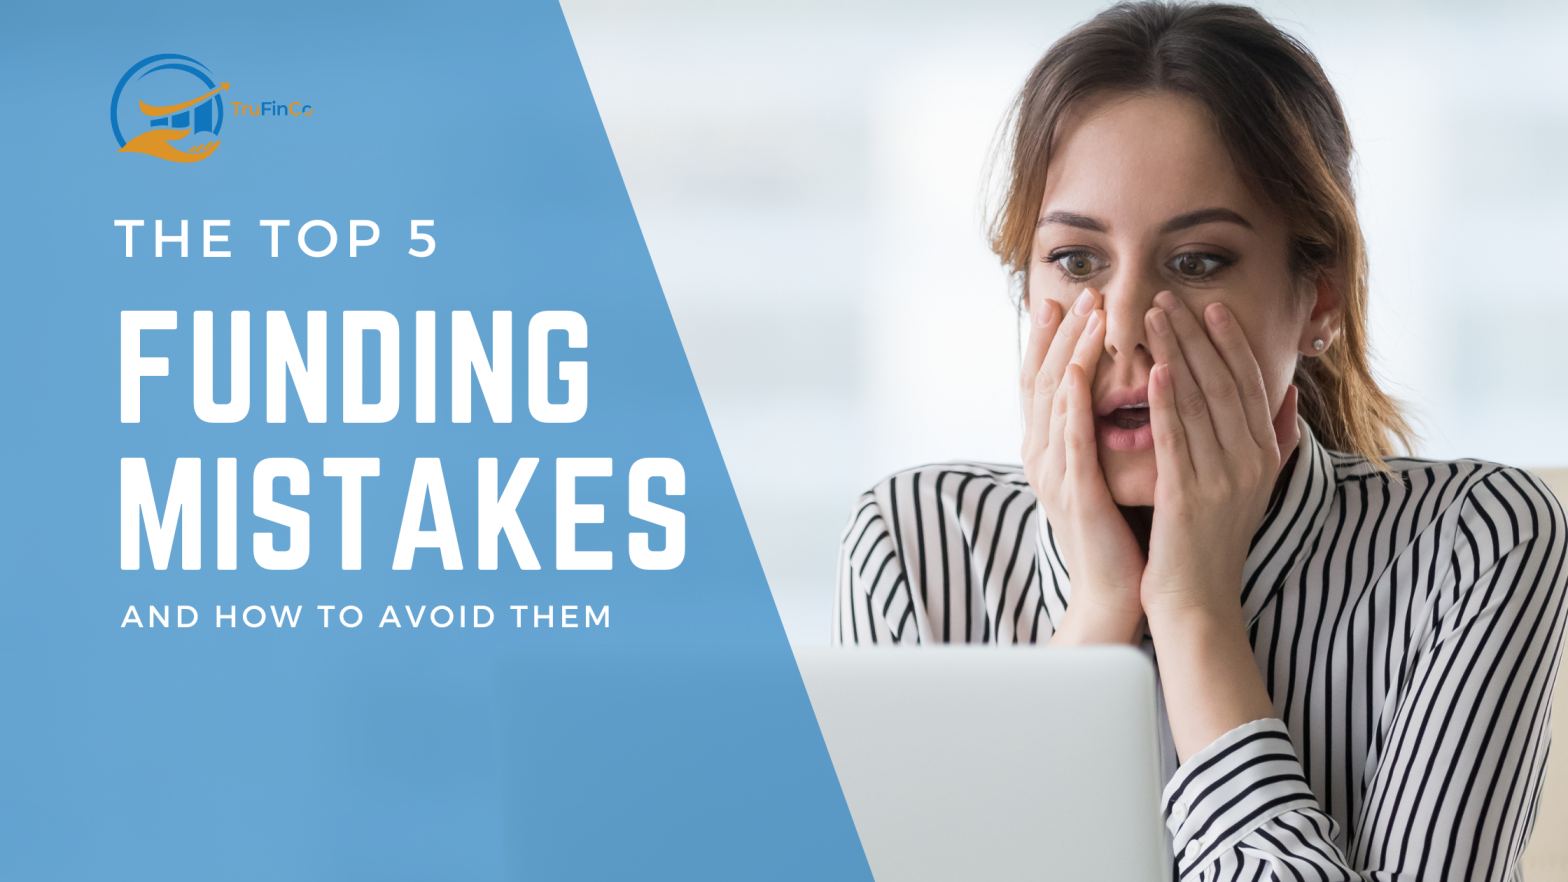 Top 5 Funding Mistakes